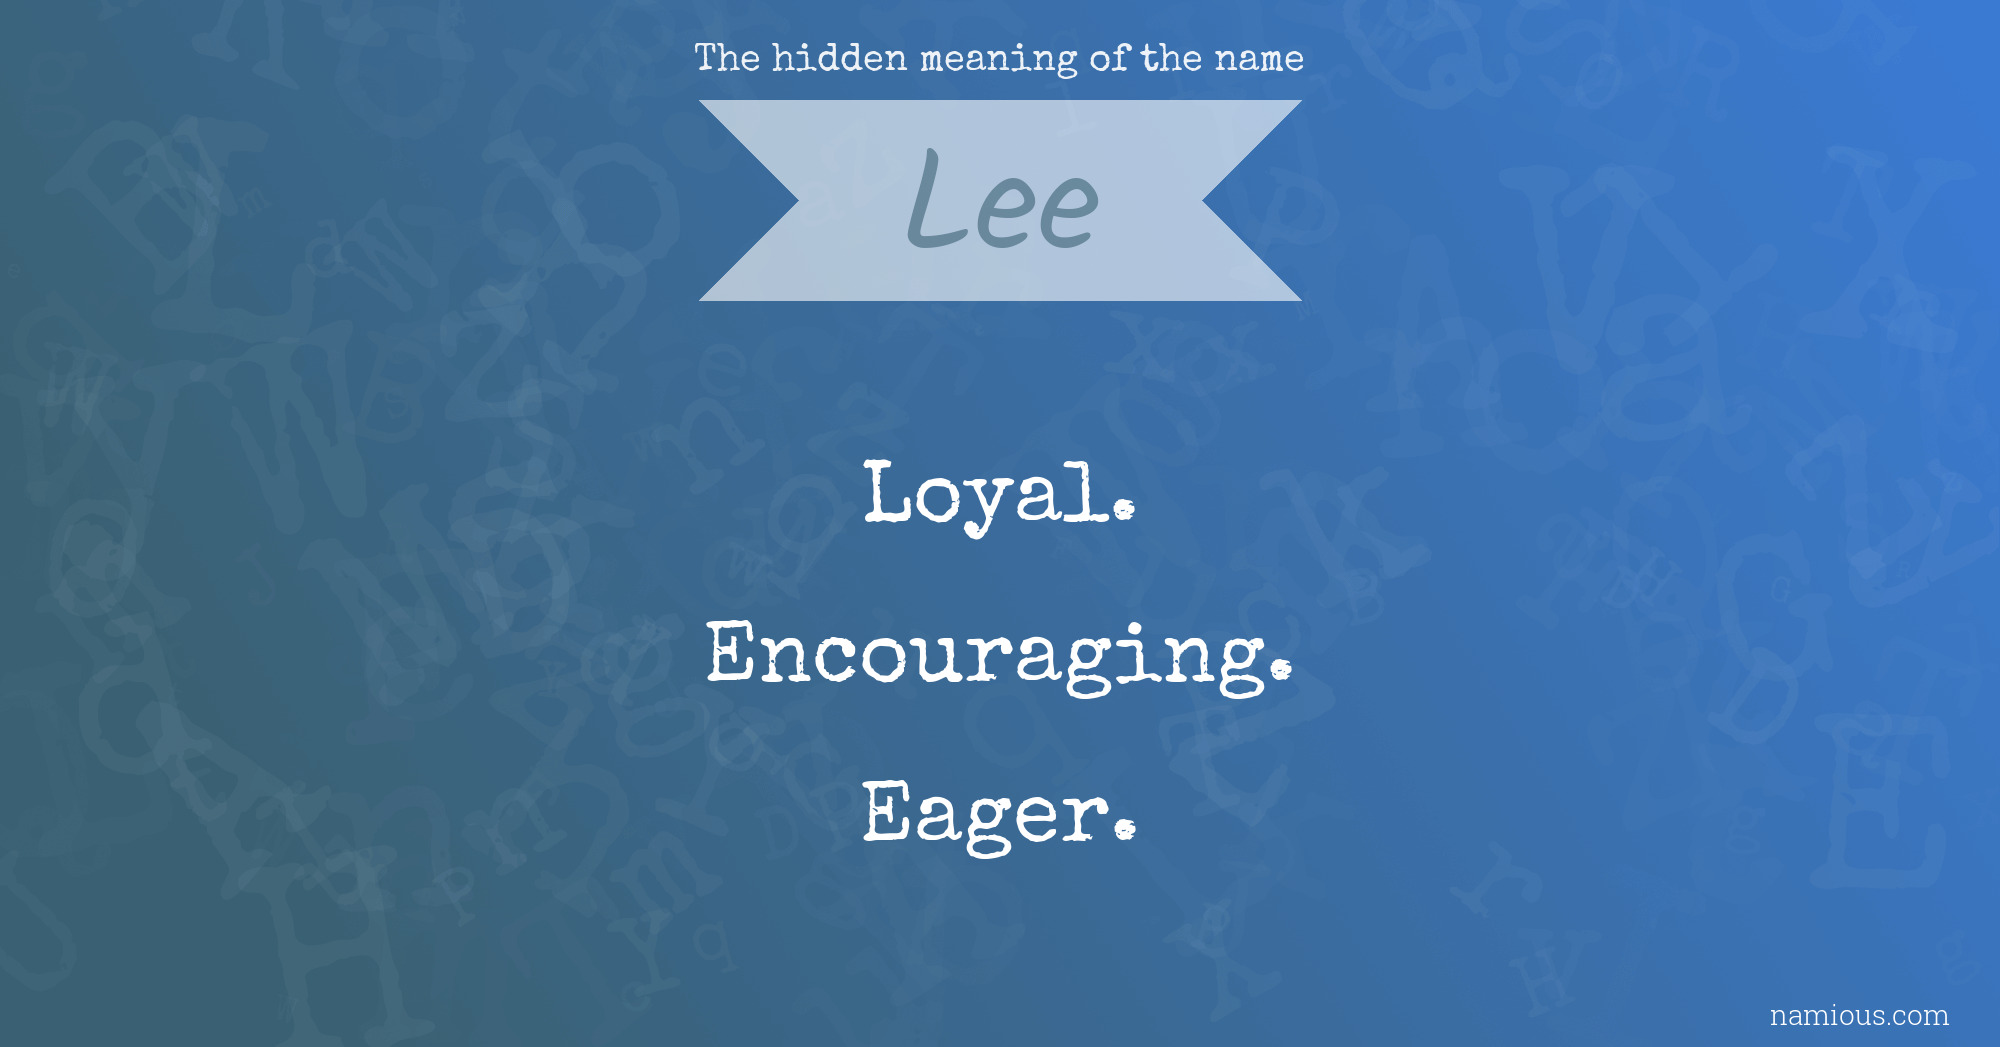 The hidden meaning of the name Lee | Namious